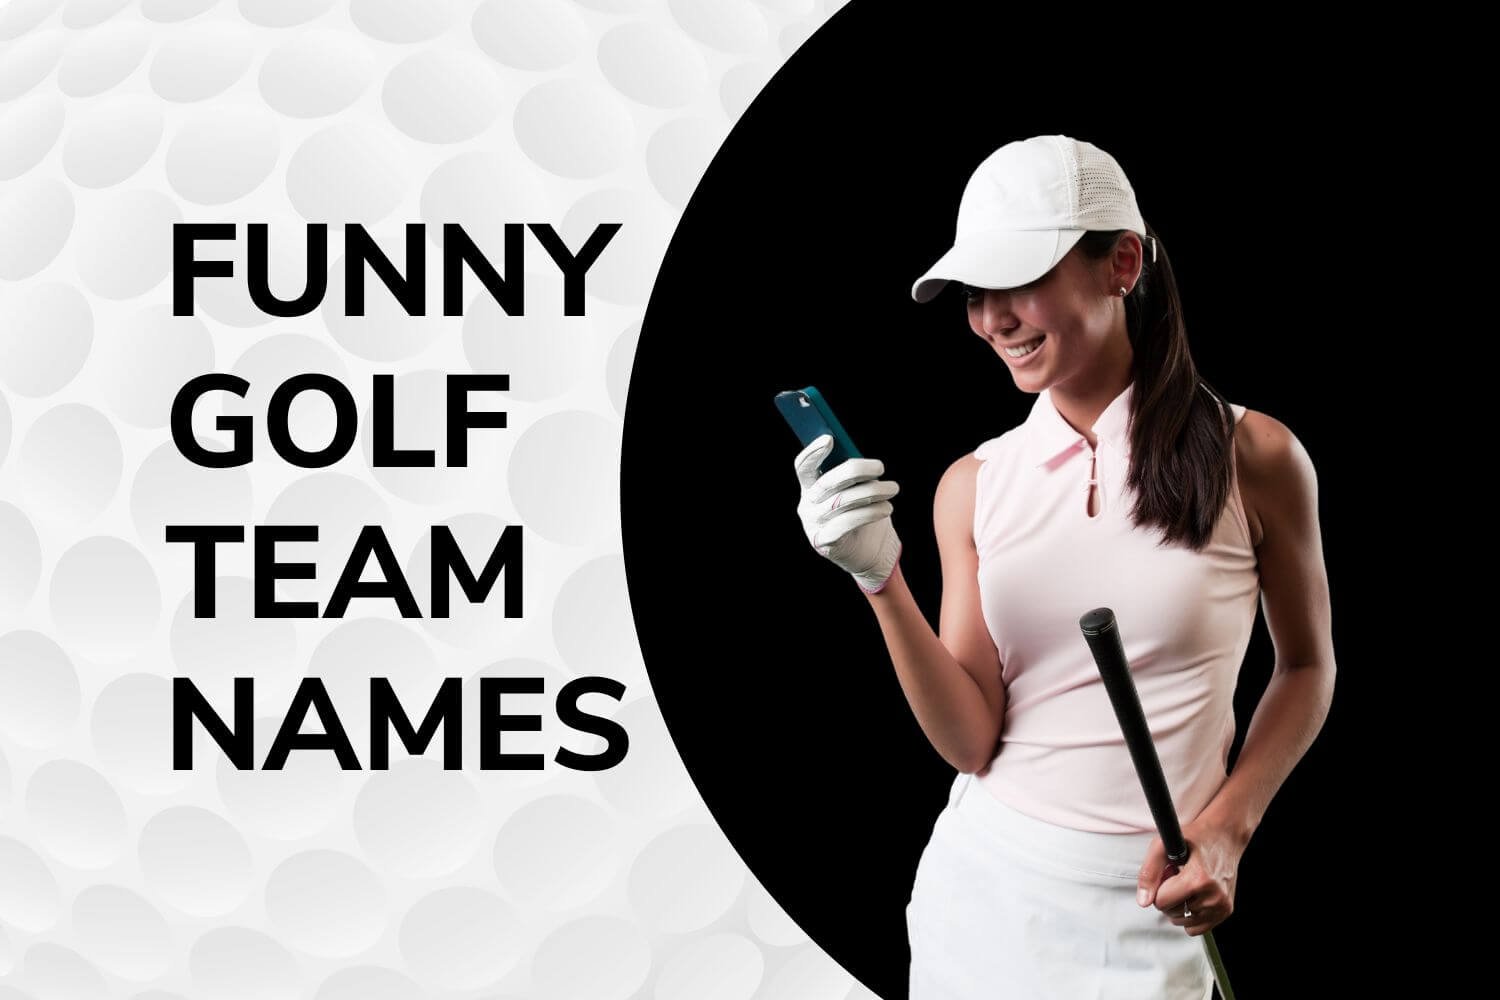 Funny golf team names text next to woman golfer